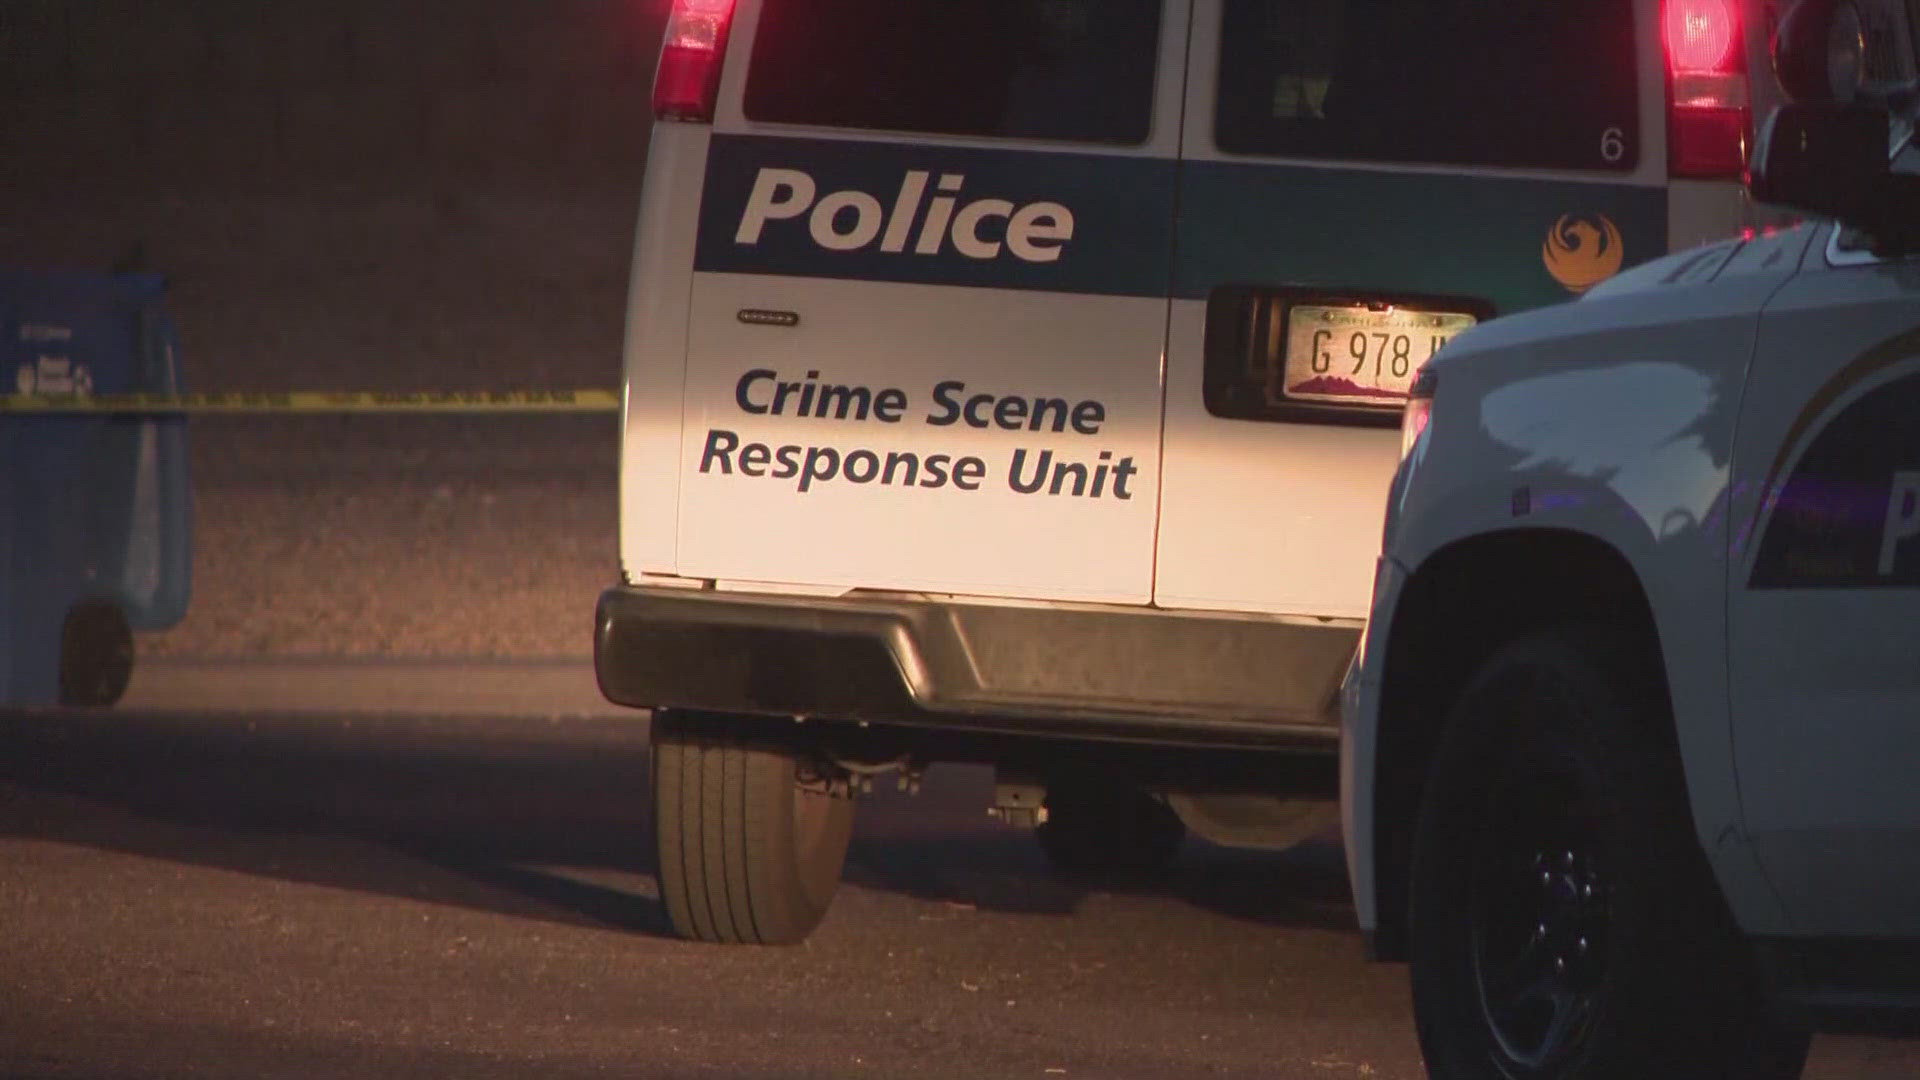 The bodies were found at a home near 16th Street and Union Hills Drive in Phoenix. Detectives are in the process of investigating the scene.